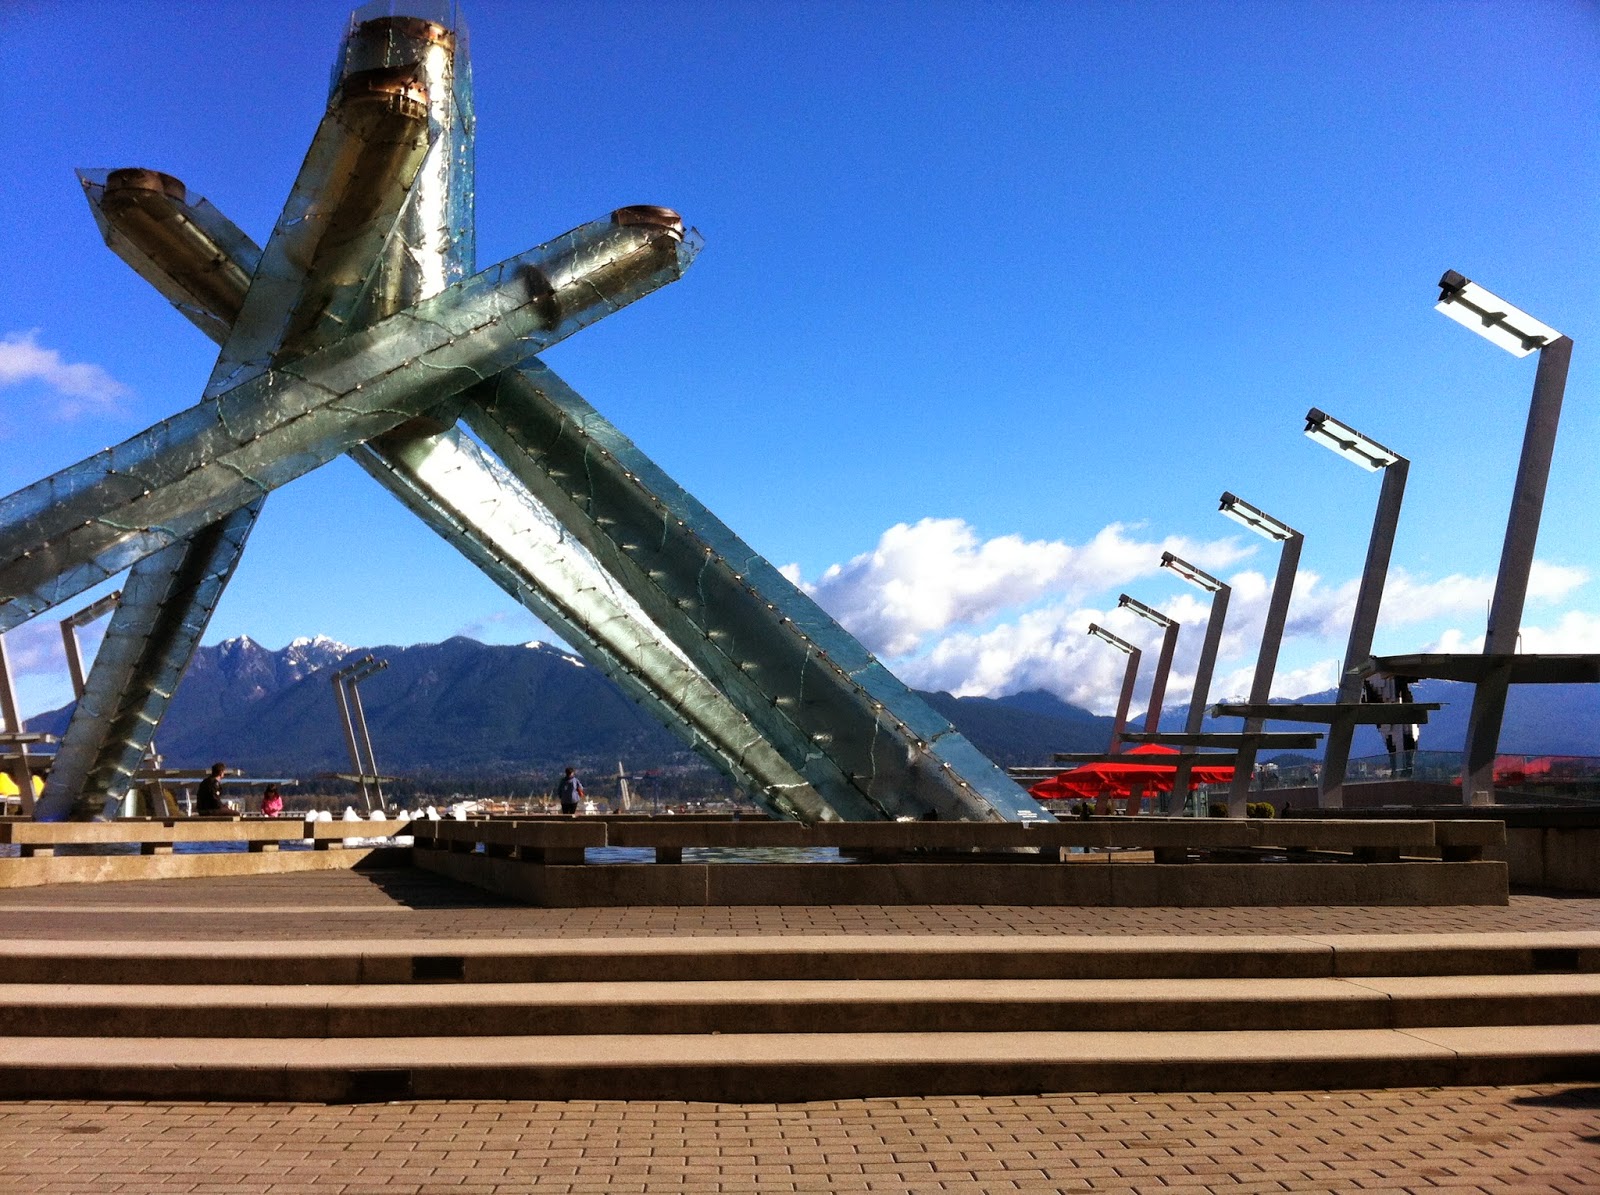 The Olympic Cauldron outside the Vancouver Convention Centre